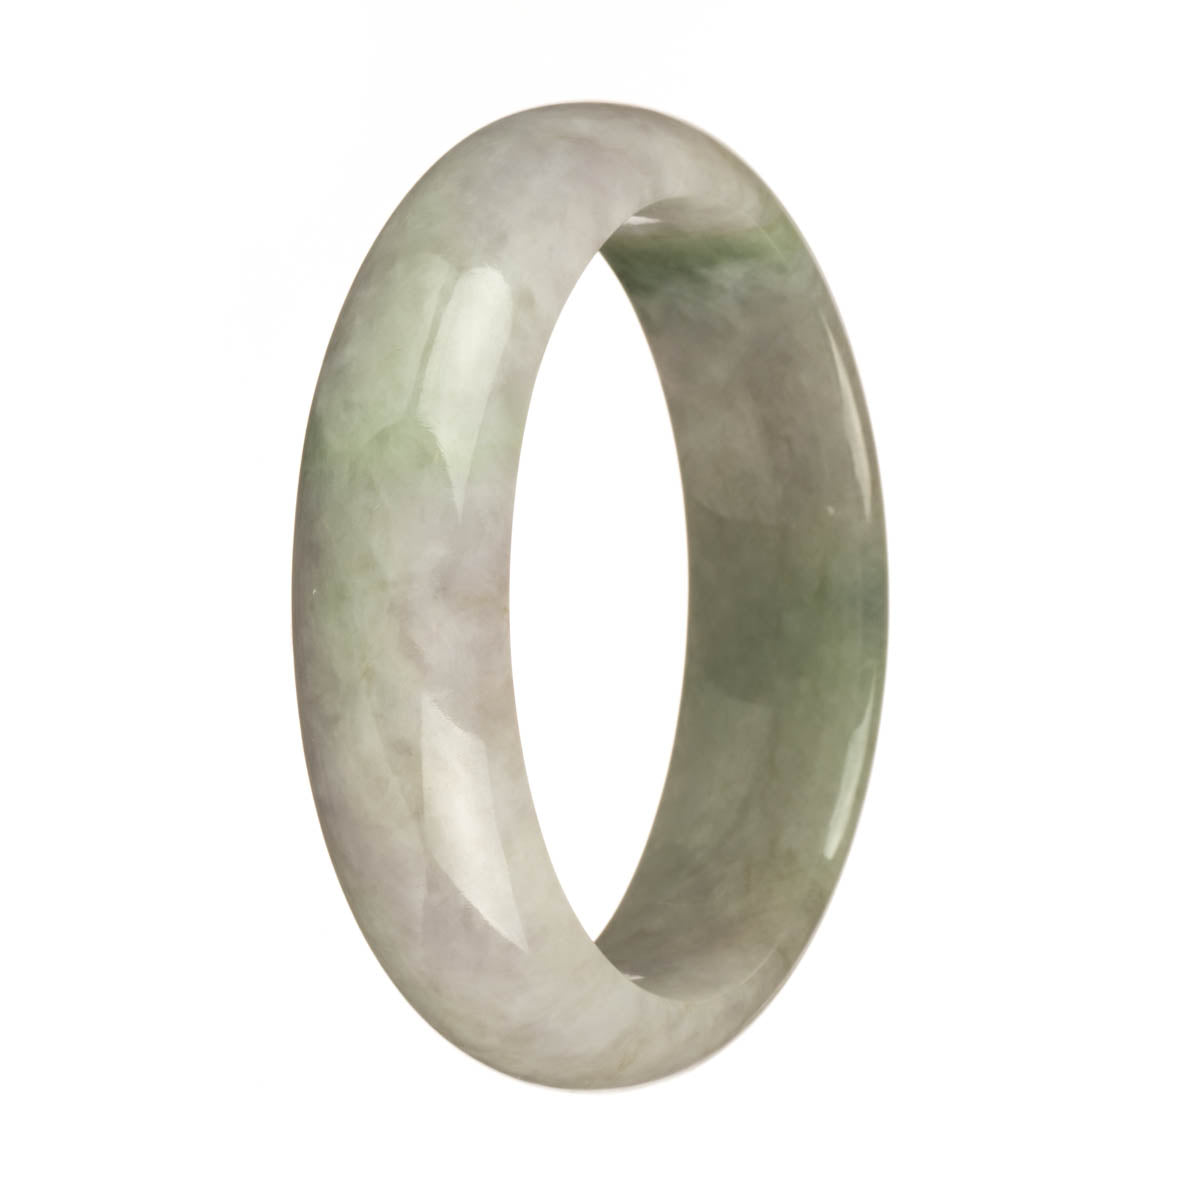 A half-moon shaped jade bracelet with a traditional green pattern, featuring real untreated lavender gemstones.